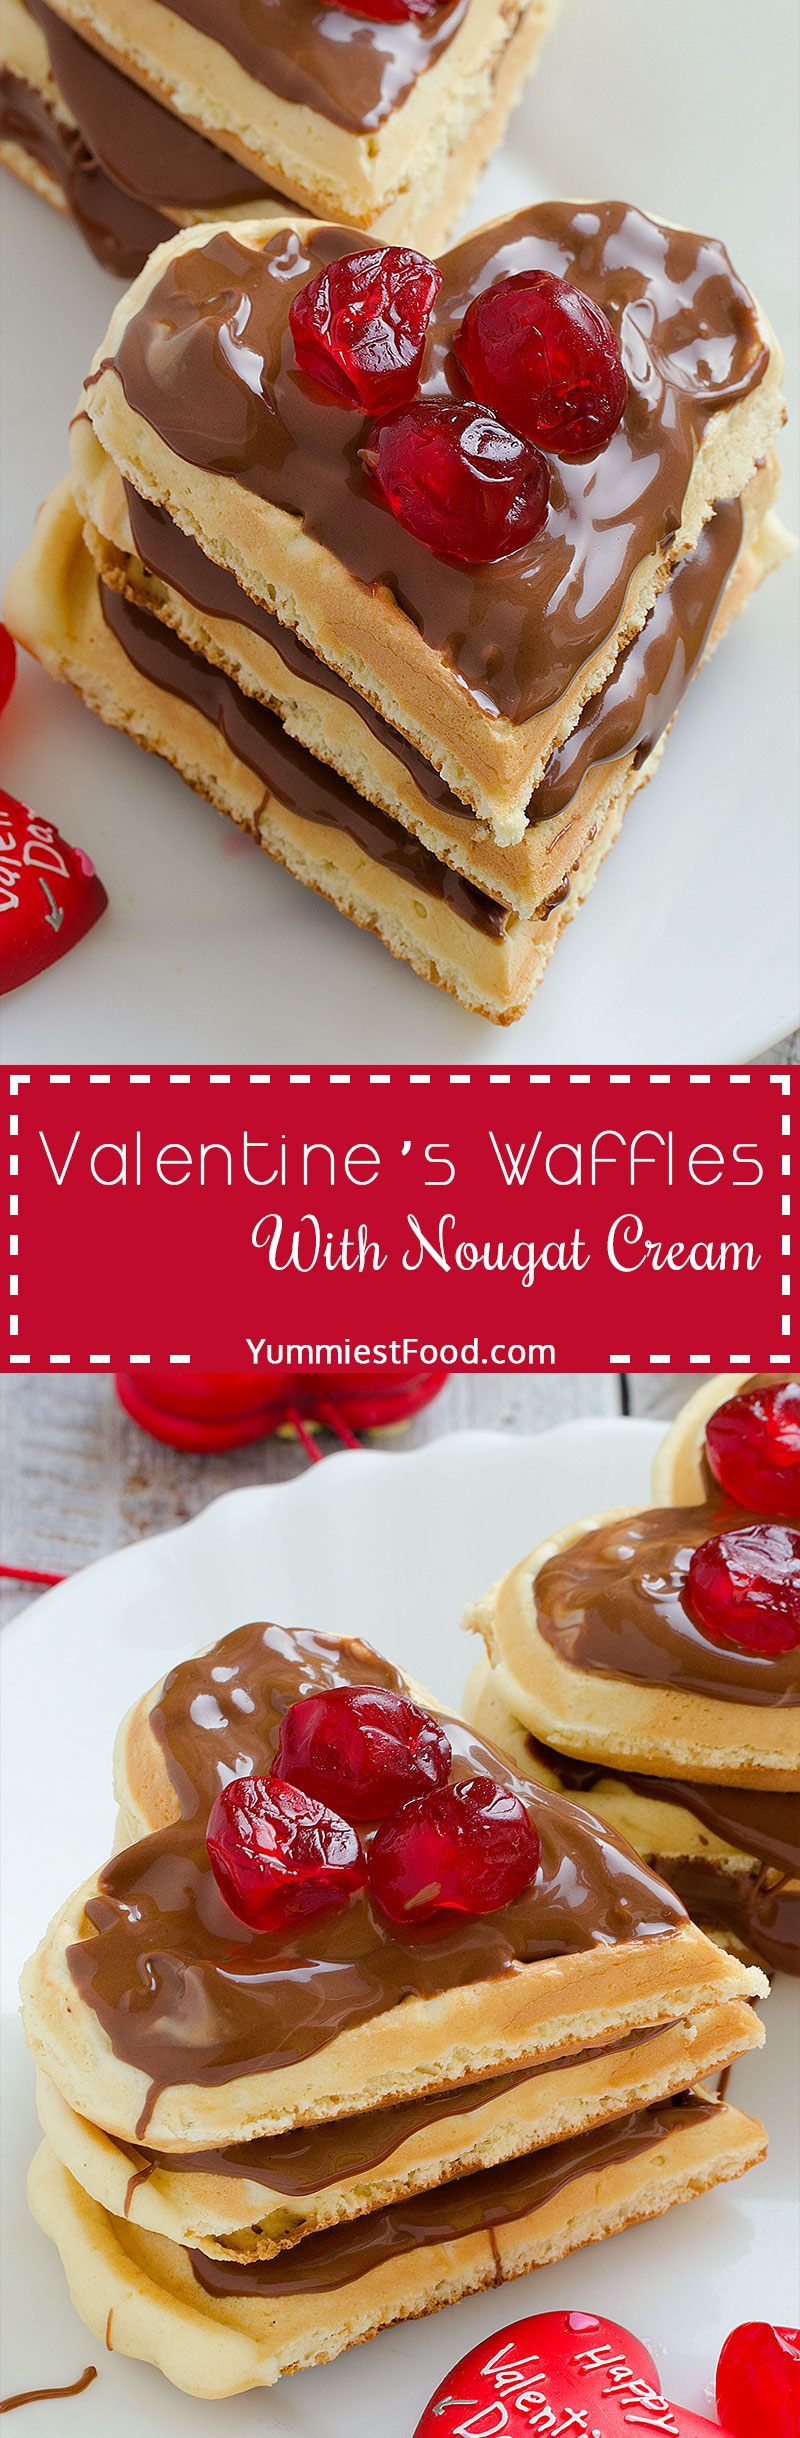 Valentine’s Waffles With Nougat Cream - Heart-Shaped